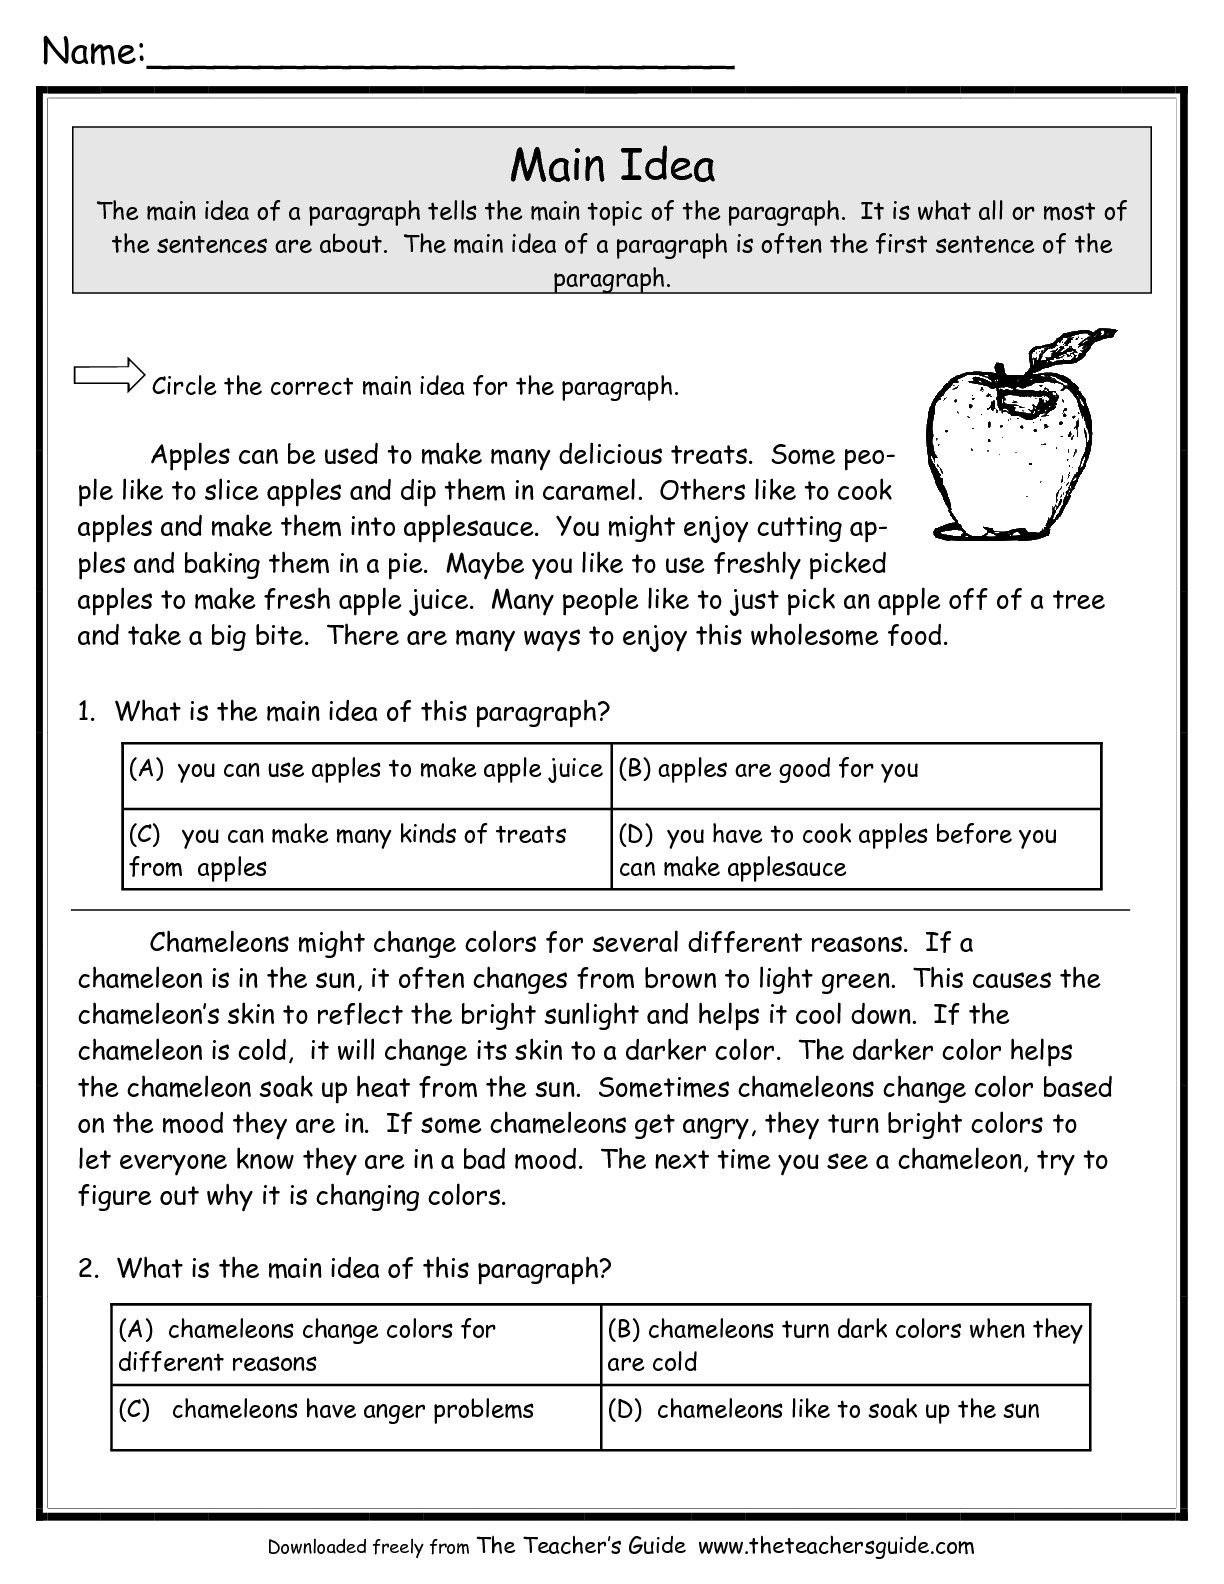 10 Gorgeous Main Idea And Supporting Details Games main idea worksheets from the teachers guide resources for work 20 2022